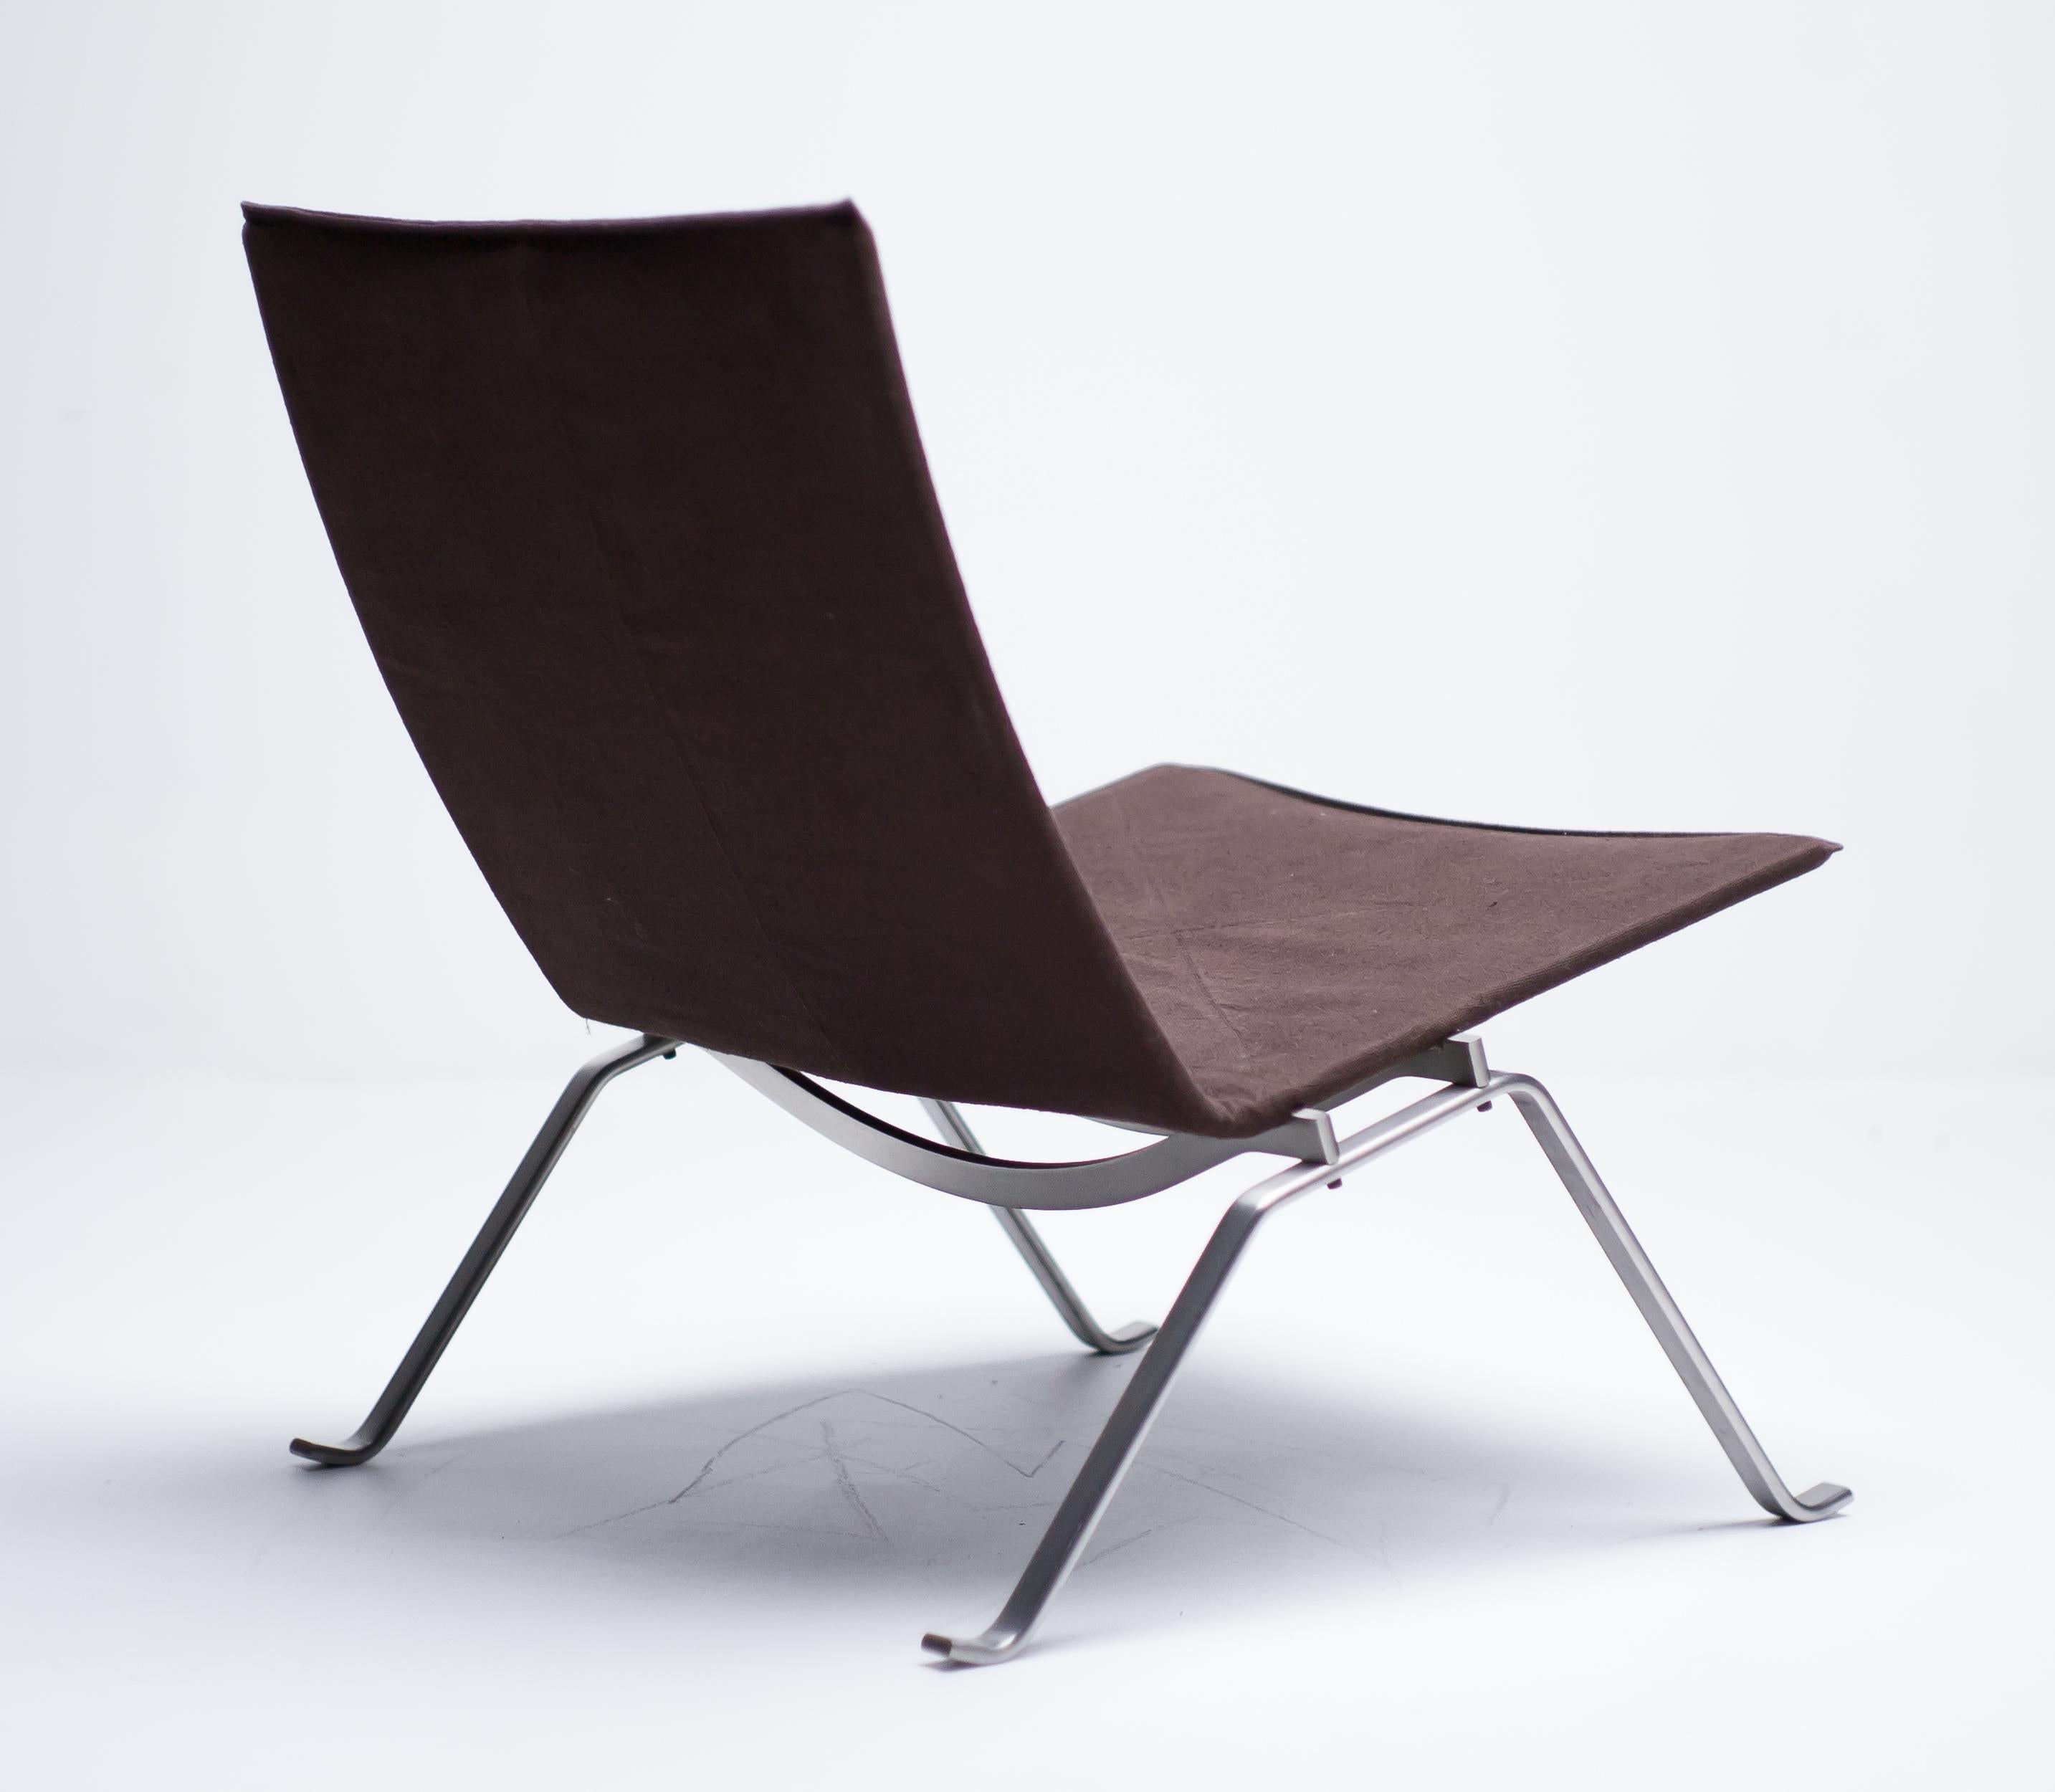 This PK22 is from the 2006 limited edition one year production canvas series.
Made by Fritz Hansen, marked with label and stamp.